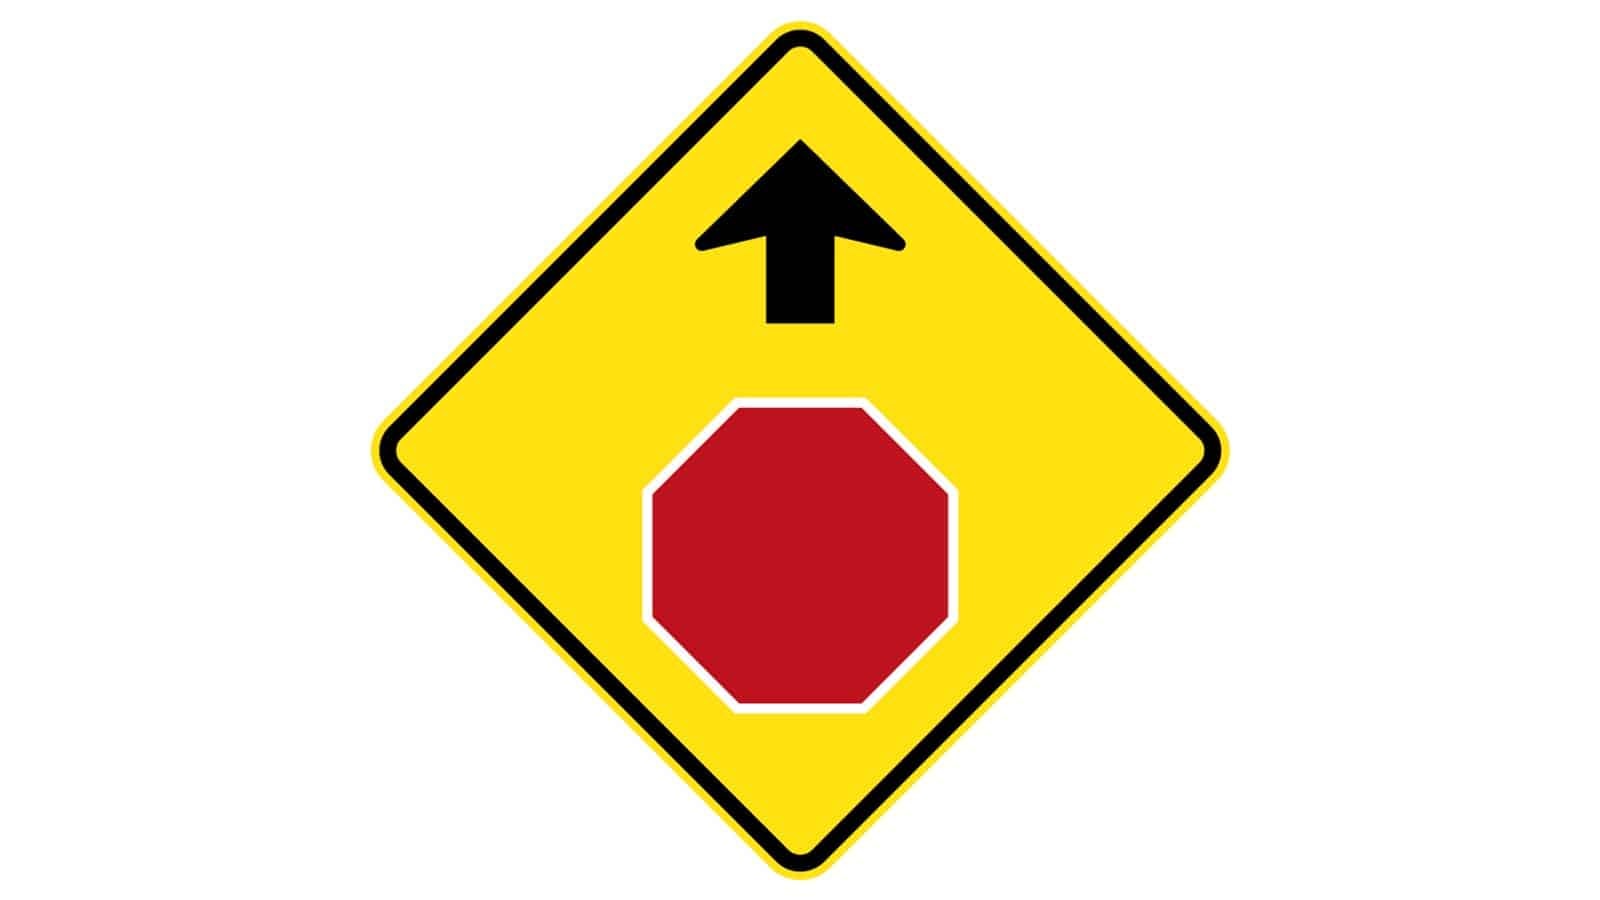 Stop Sign Ahead Sign Australian Road SIgn